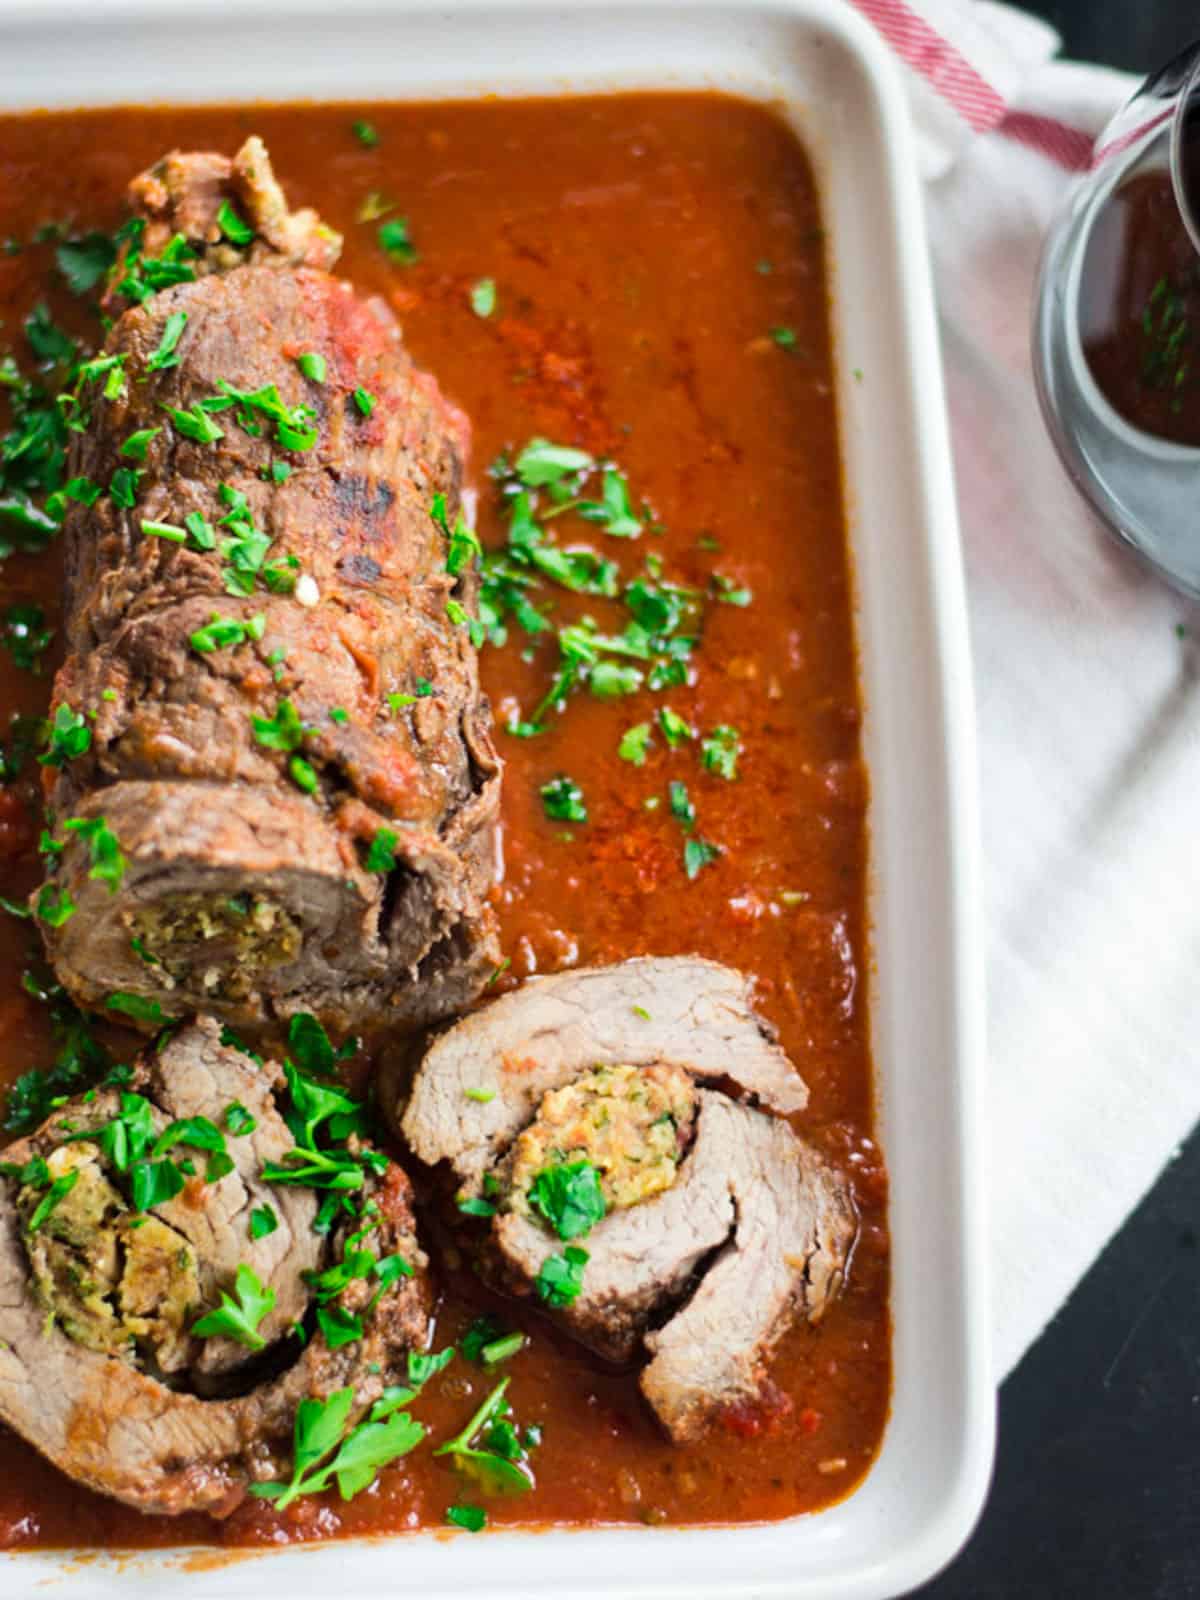 Stuffed beef braciole with prosciutto and parmesan.